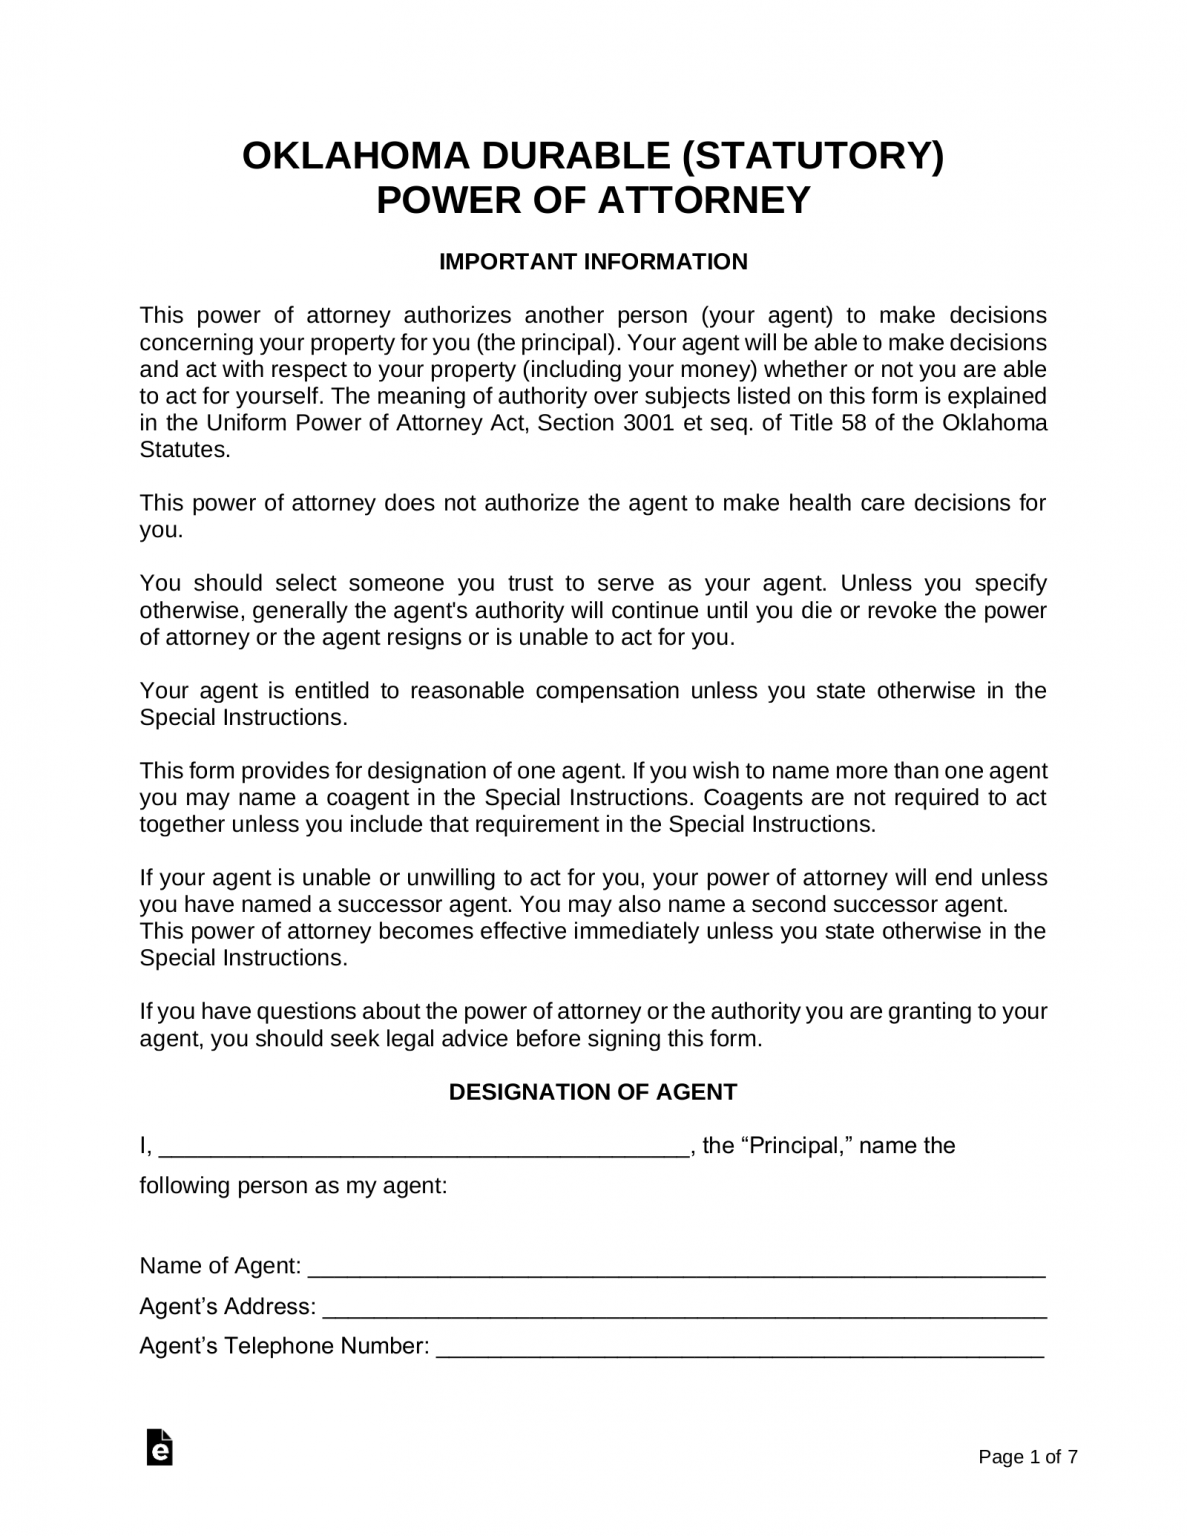 Can You Print Out A Power Of Attorney Form